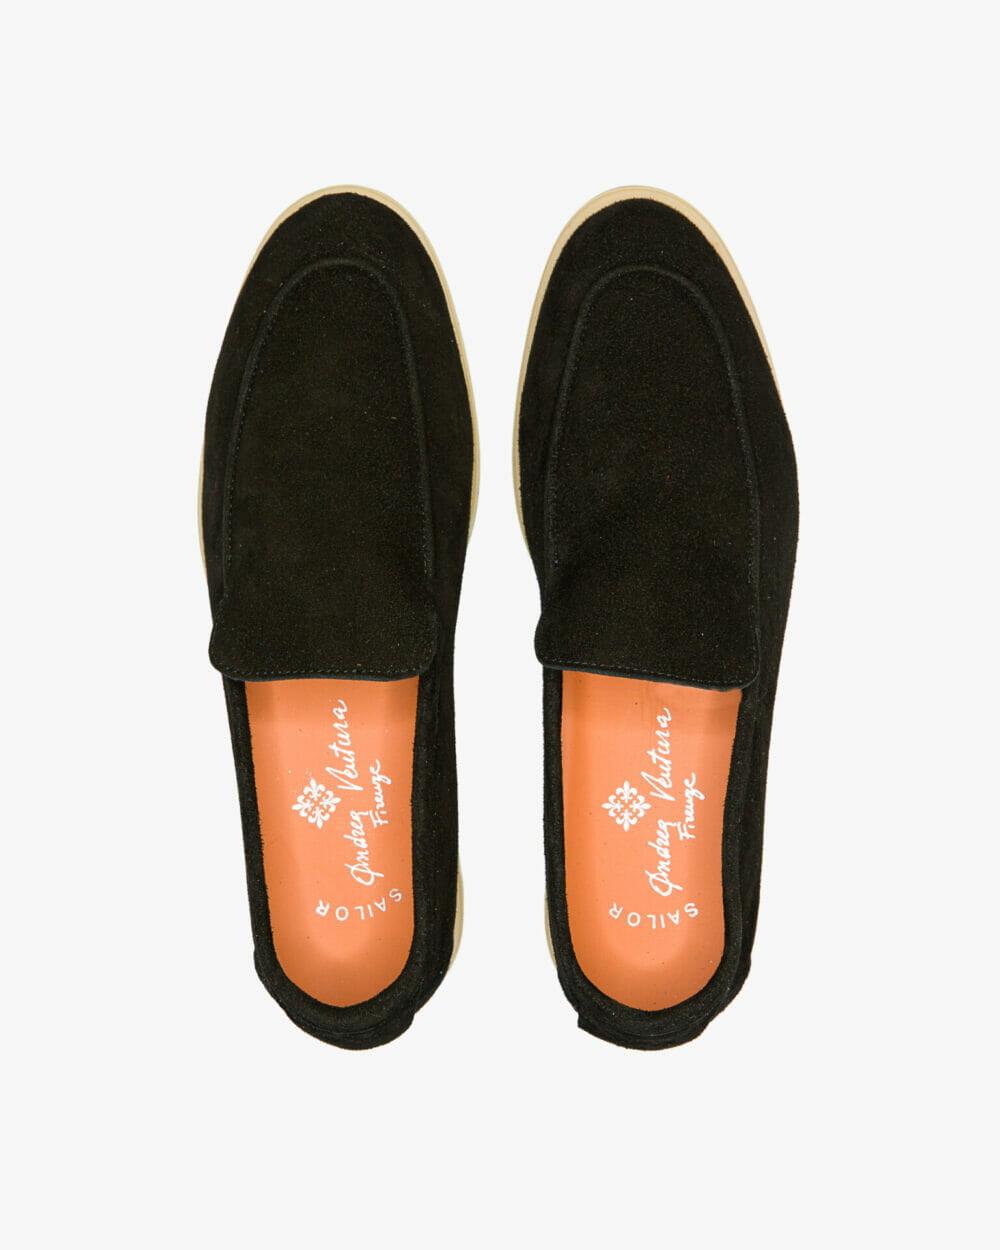 Aq-D-coast-black-suede-from-above